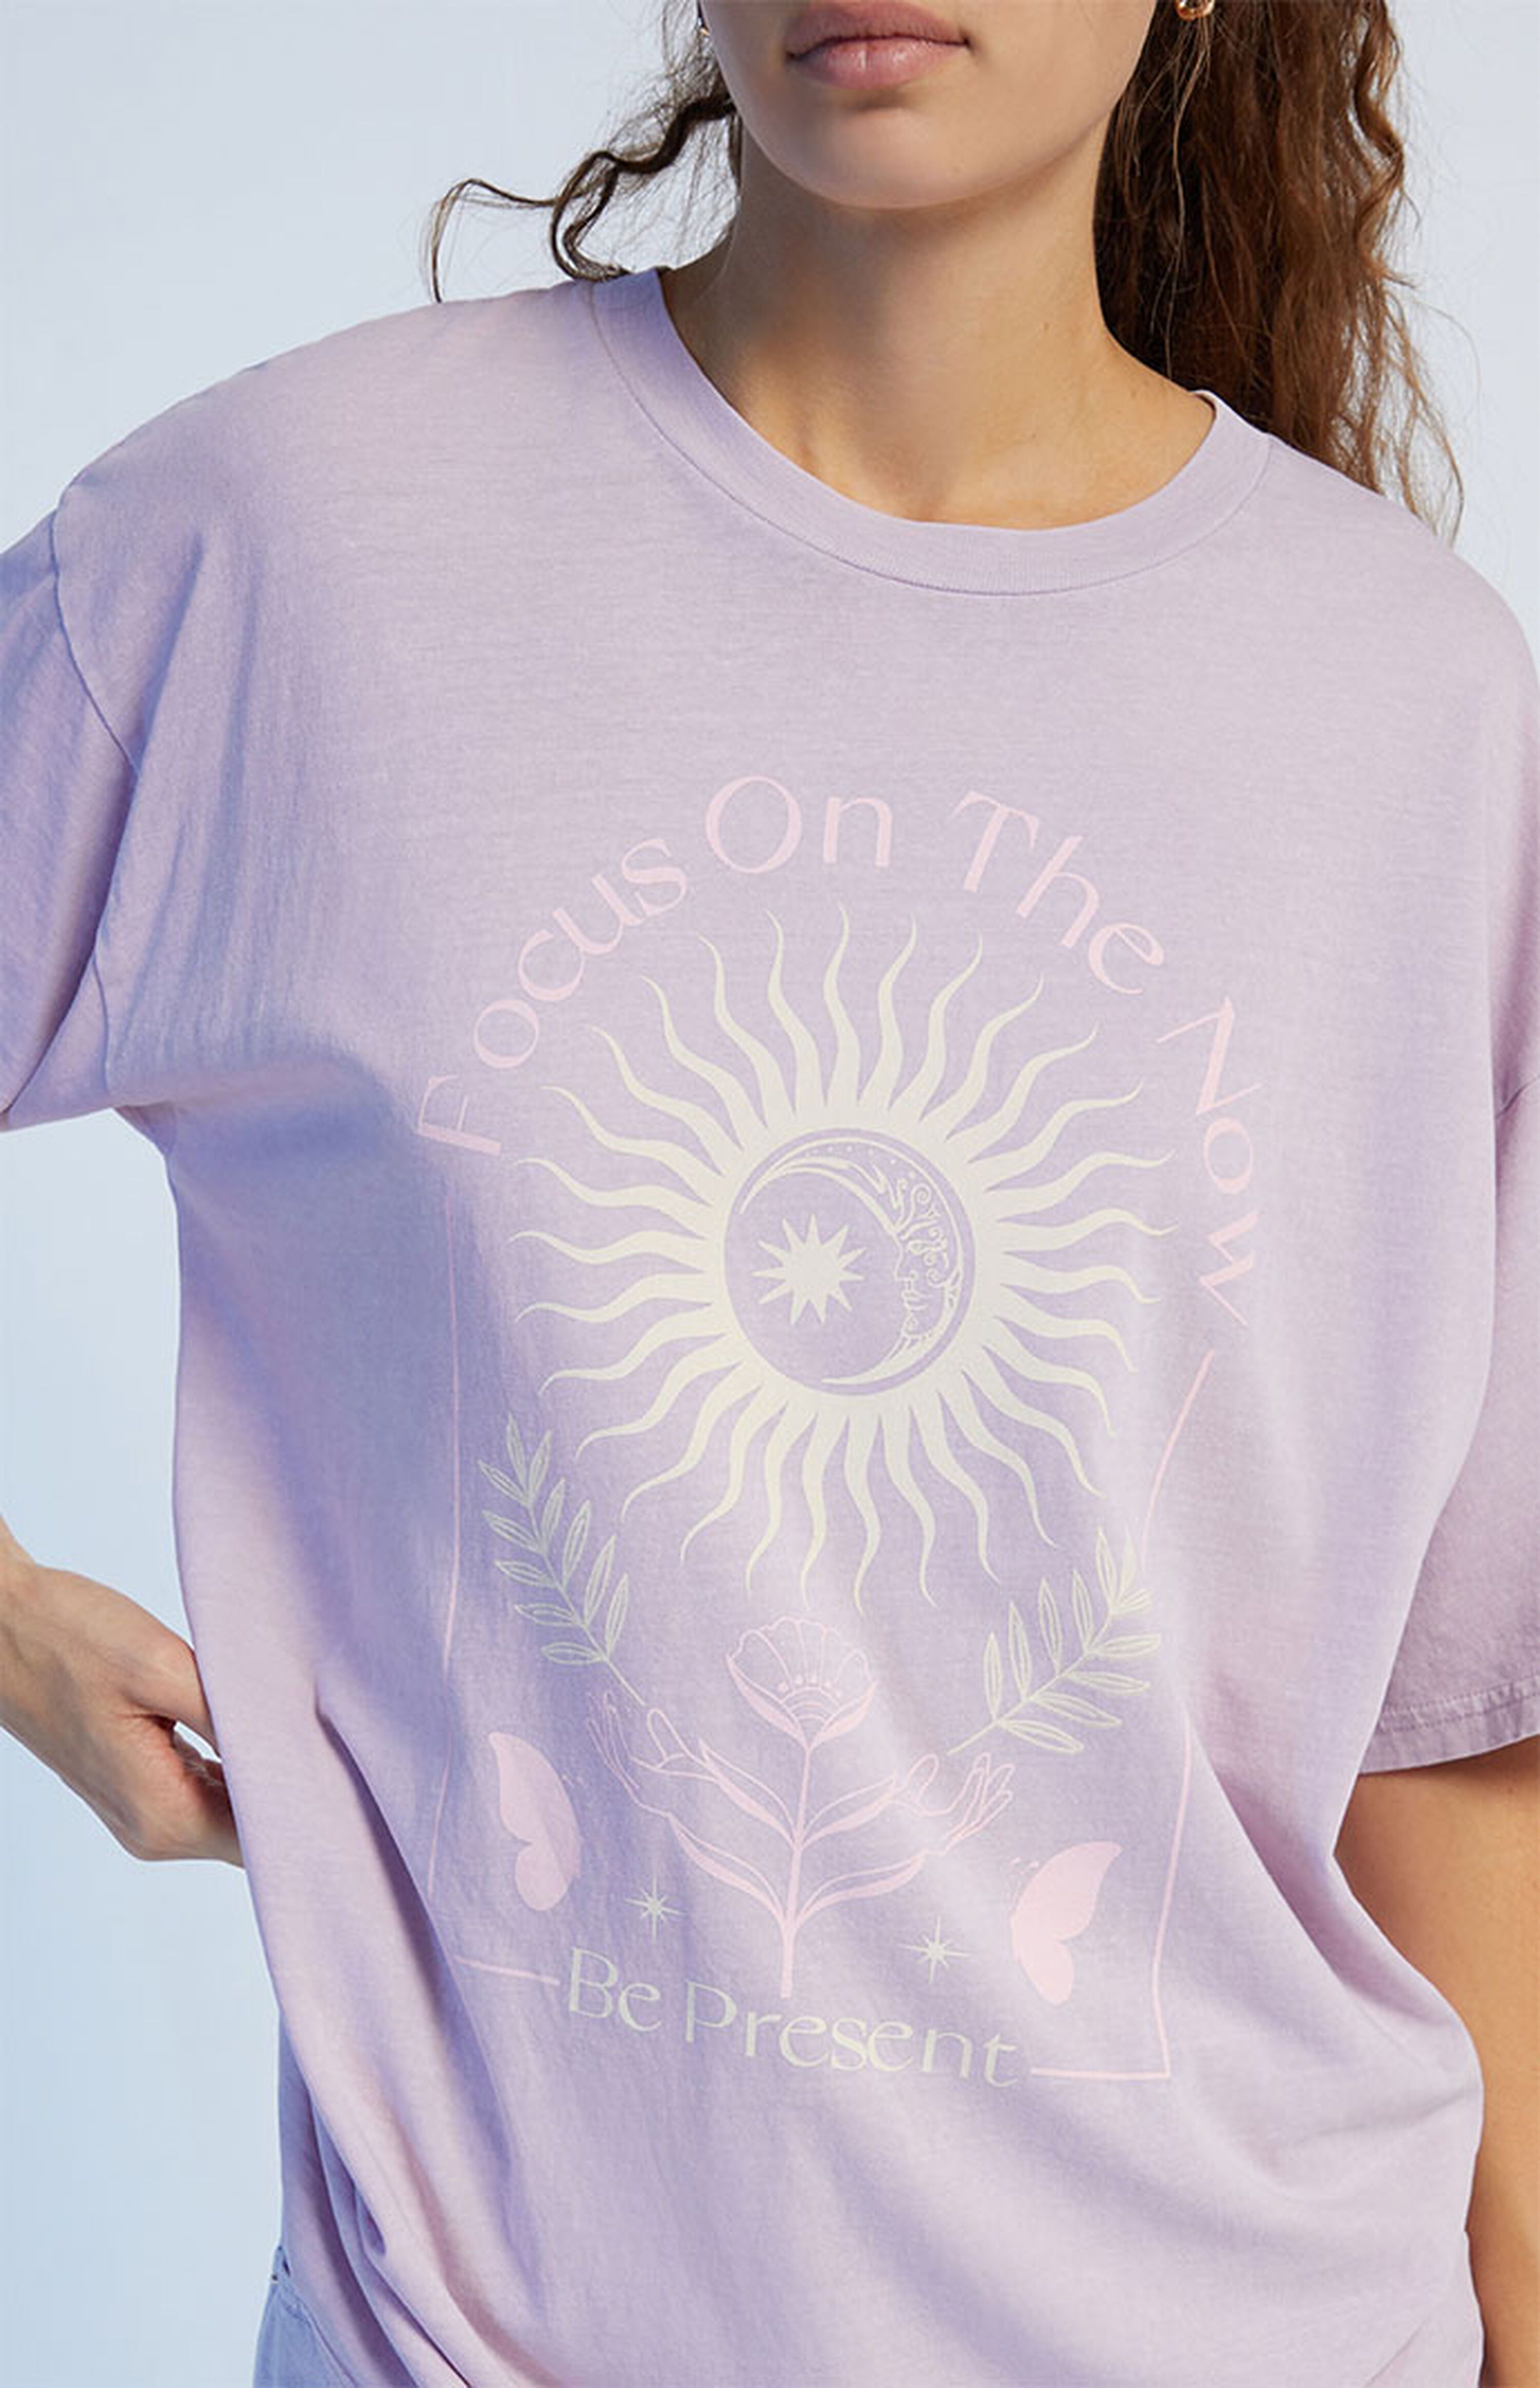 Golden Hour Focus On The Now T-Shirt | PacSun